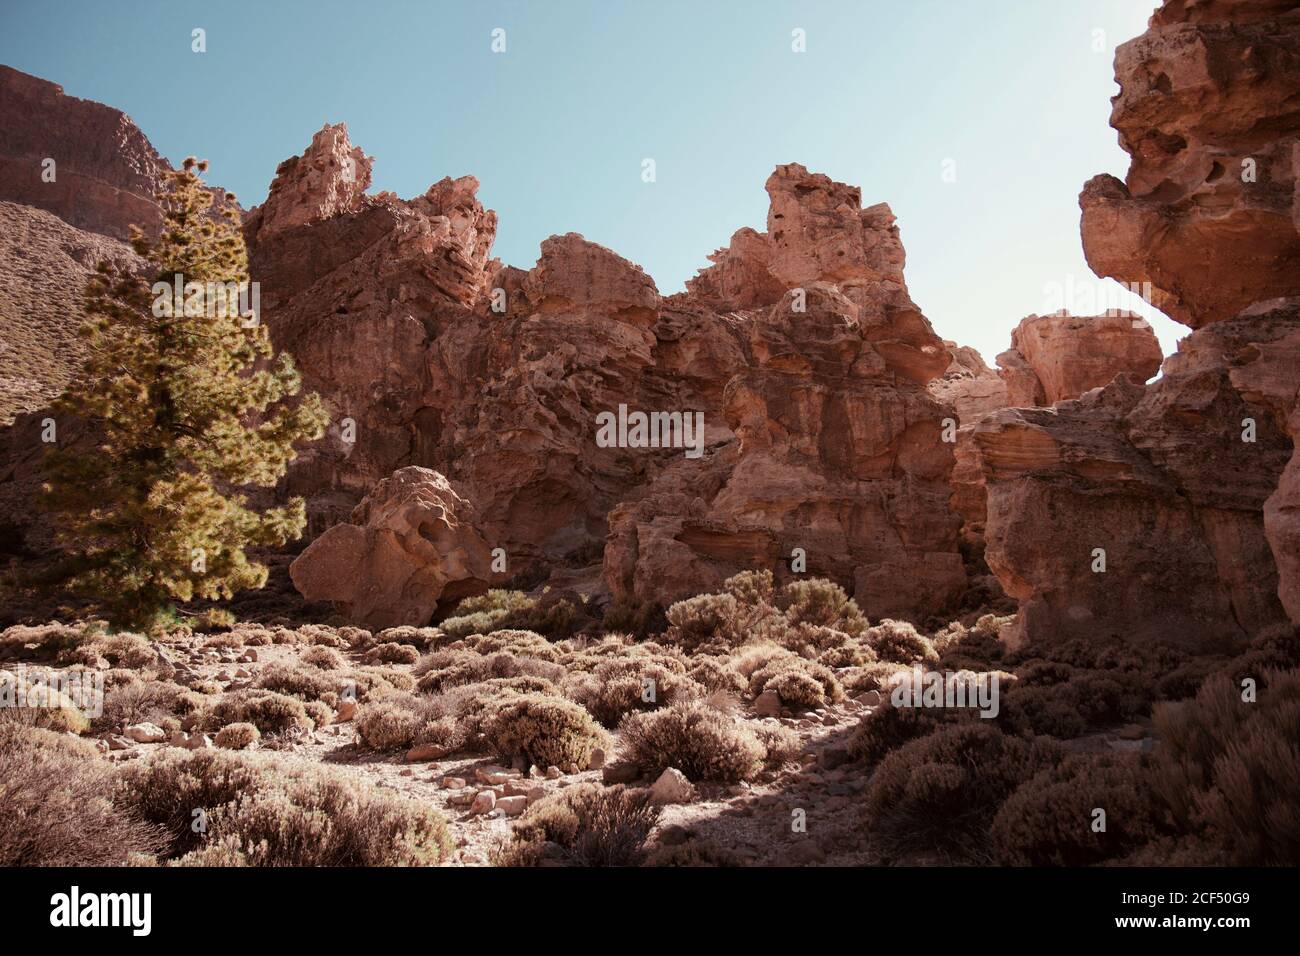 Rough stony cliffs and small shrubs with clear blue sky on background in Teide, Spain Stock Photo